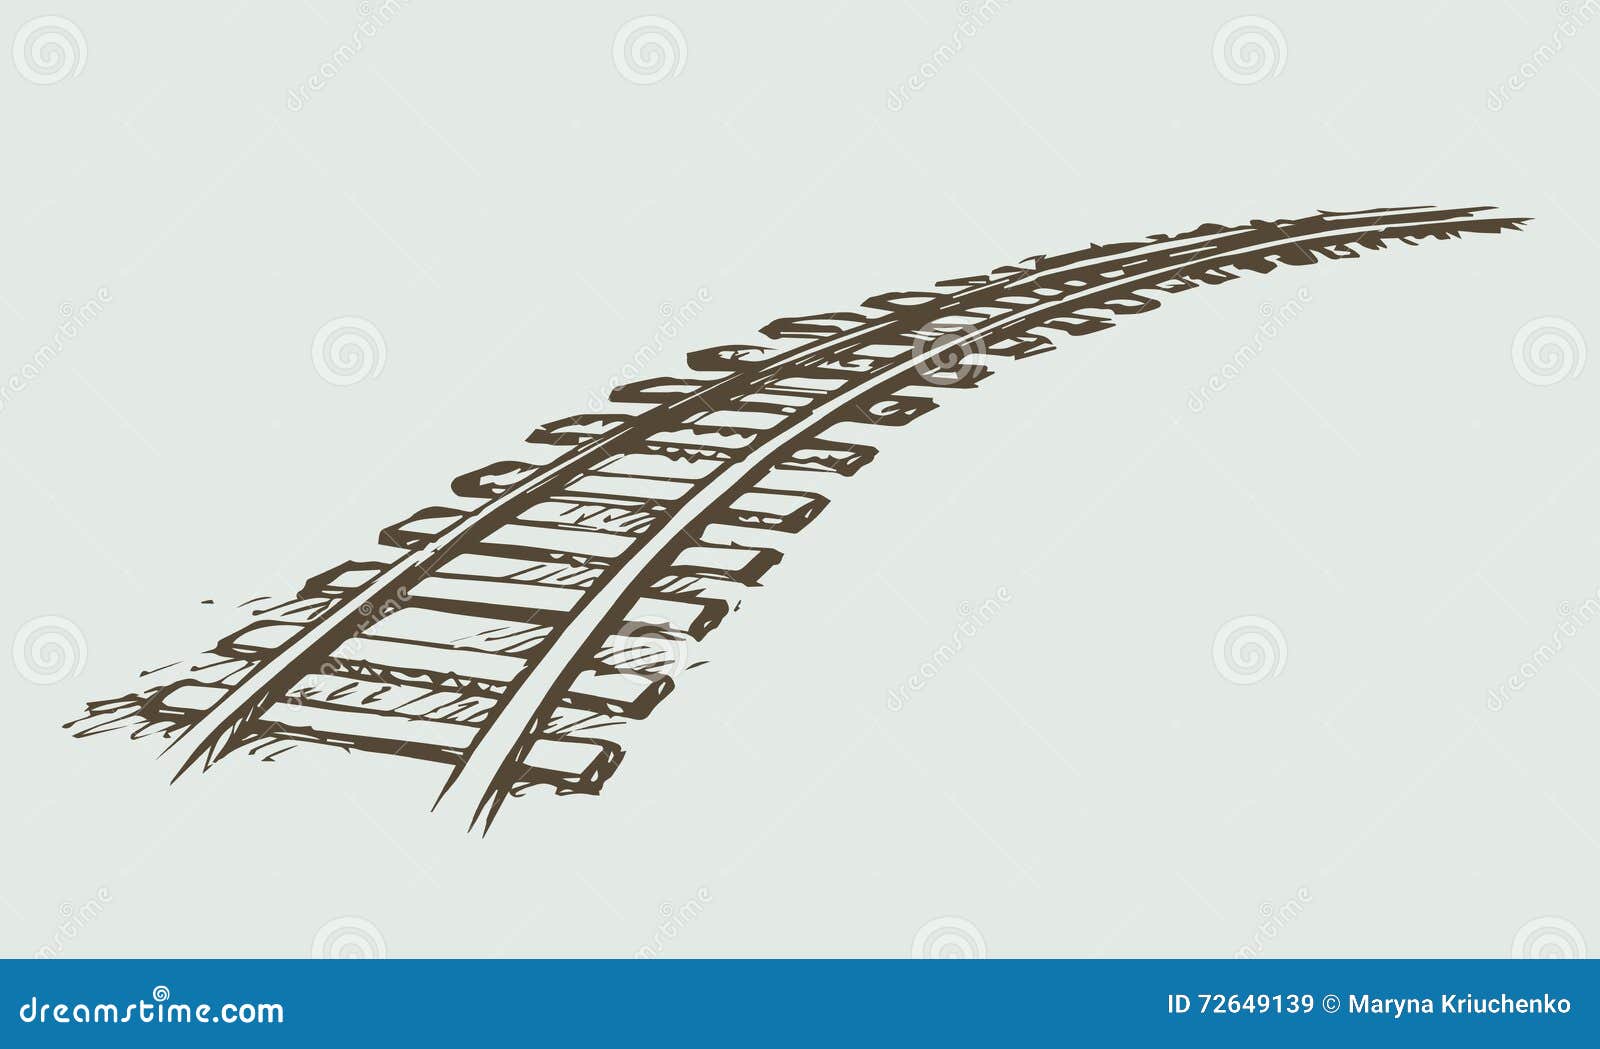 rails with wooden sleepers vector illustration 516401 Vector Art